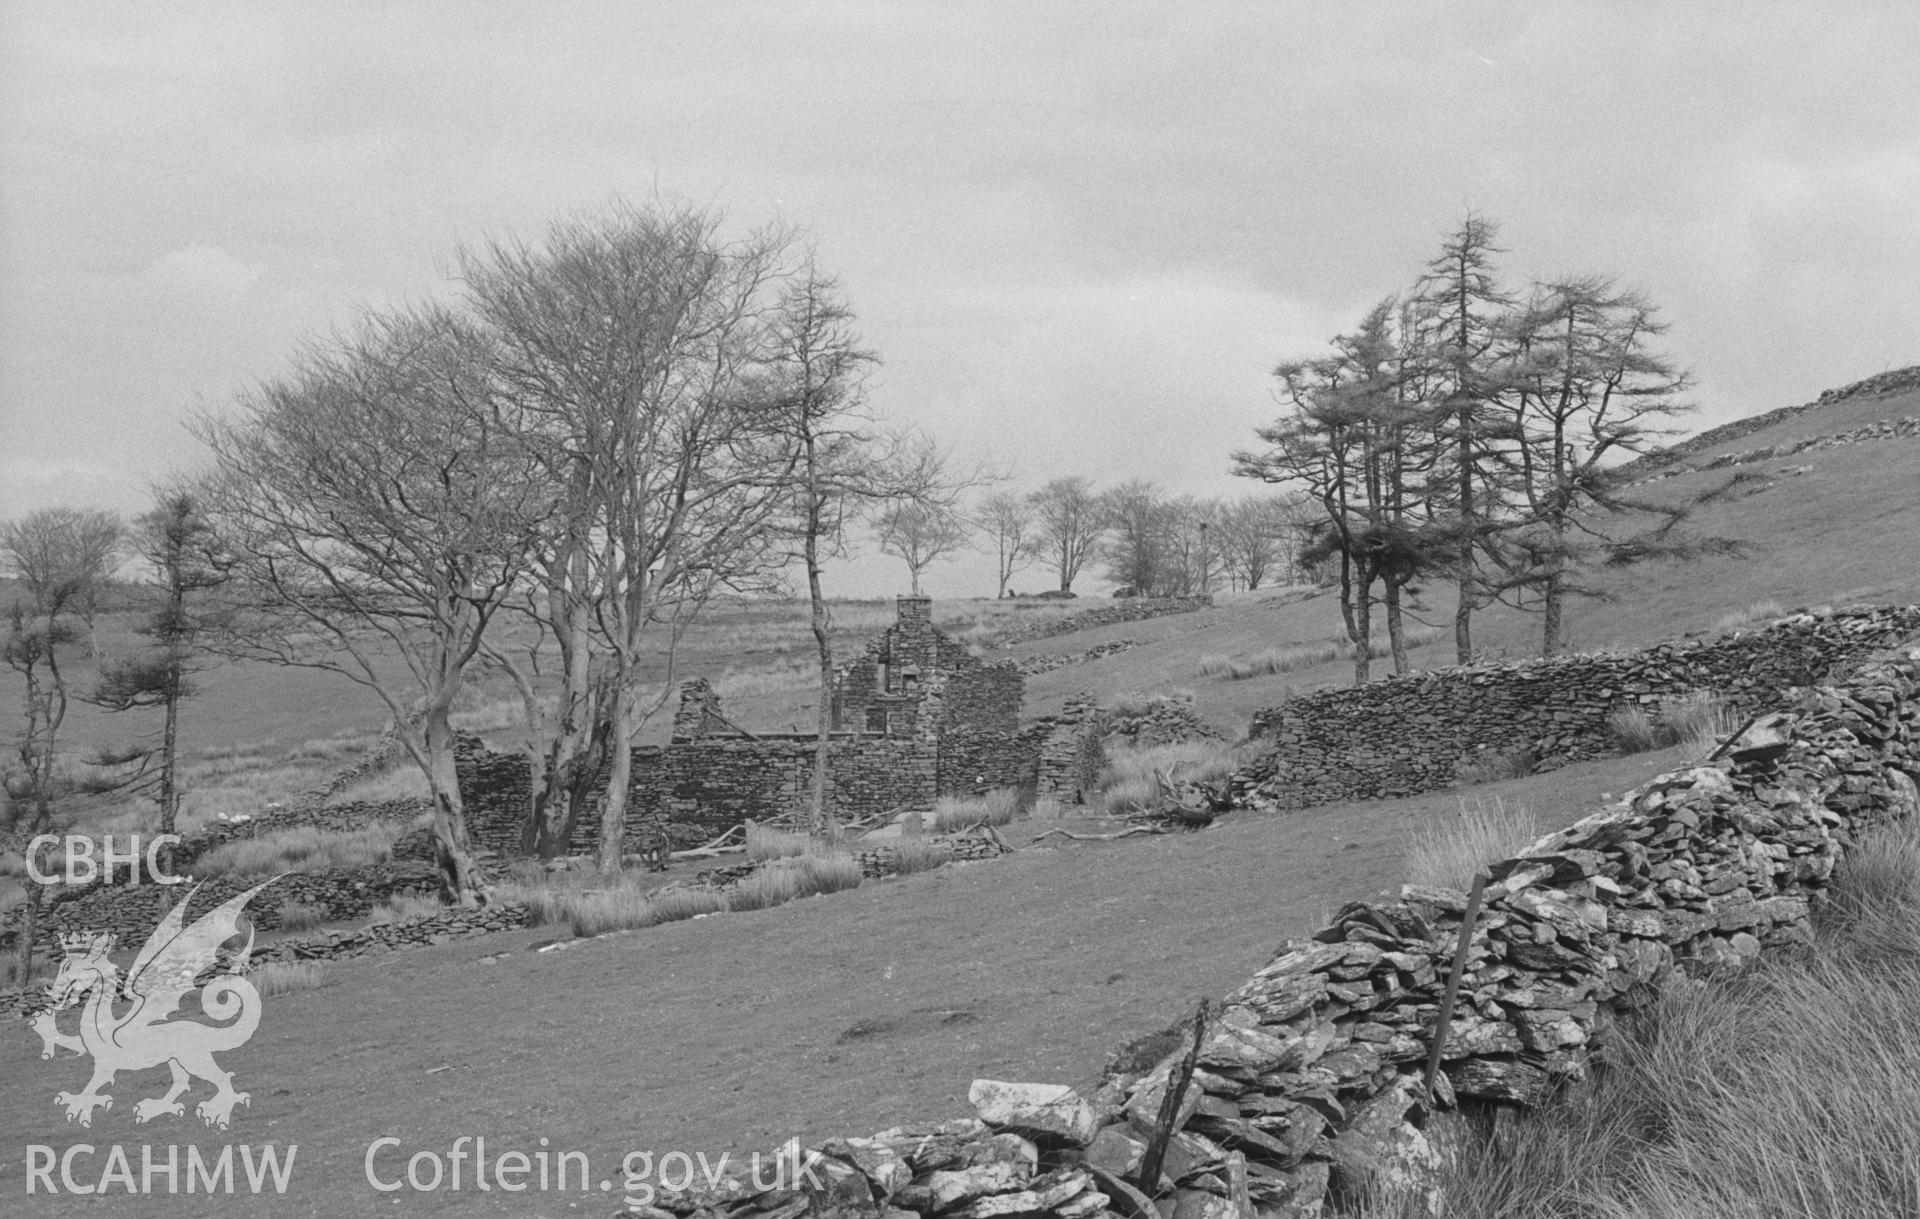 Digital copy of a black and white negative showing ruins of Tan-y-Graig farmstead near Carn Gron, Gwar Ffynnon, Tregaron. Photographed by Arthur O. Chater in April 1966 from Grid Reference SN 729 605, looking north north east.